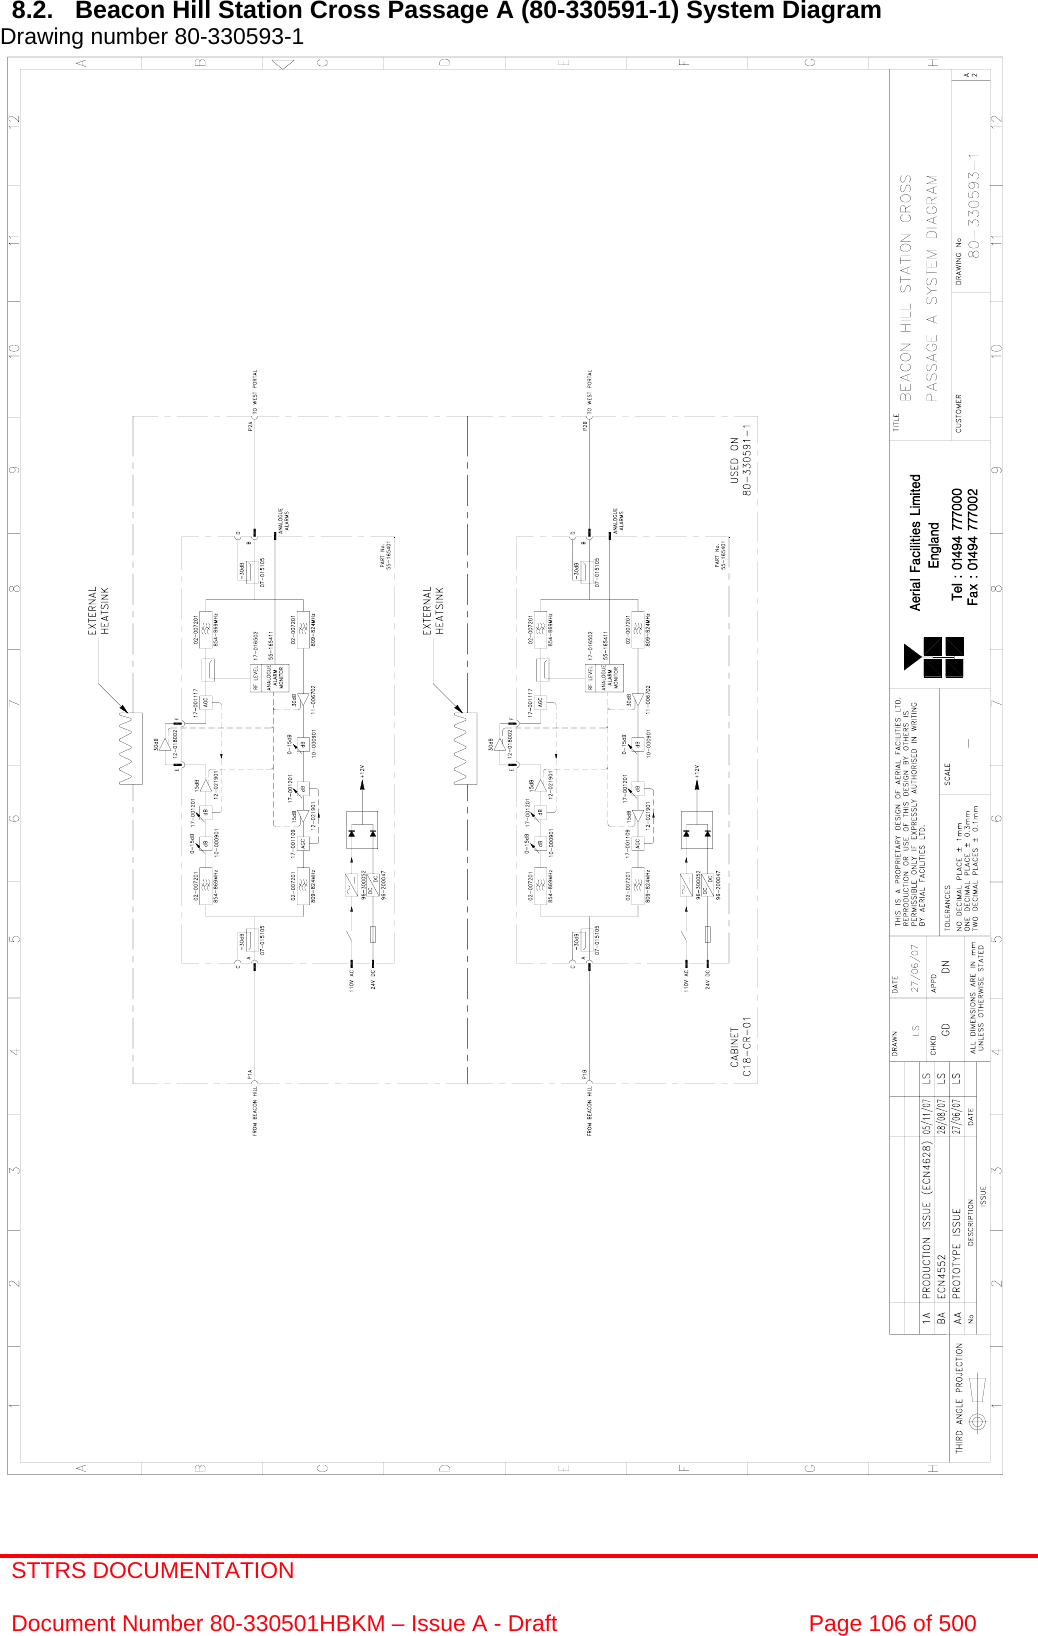 STTRS DOCUMENTATION  Document Number 80-330501HBKM – Issue A - Draft  Page 106 of 500   8.2.  Beacon Hill Station Cross Passage A (80-330591-1) System Diagram Drawing number 80-330593-1                                                       